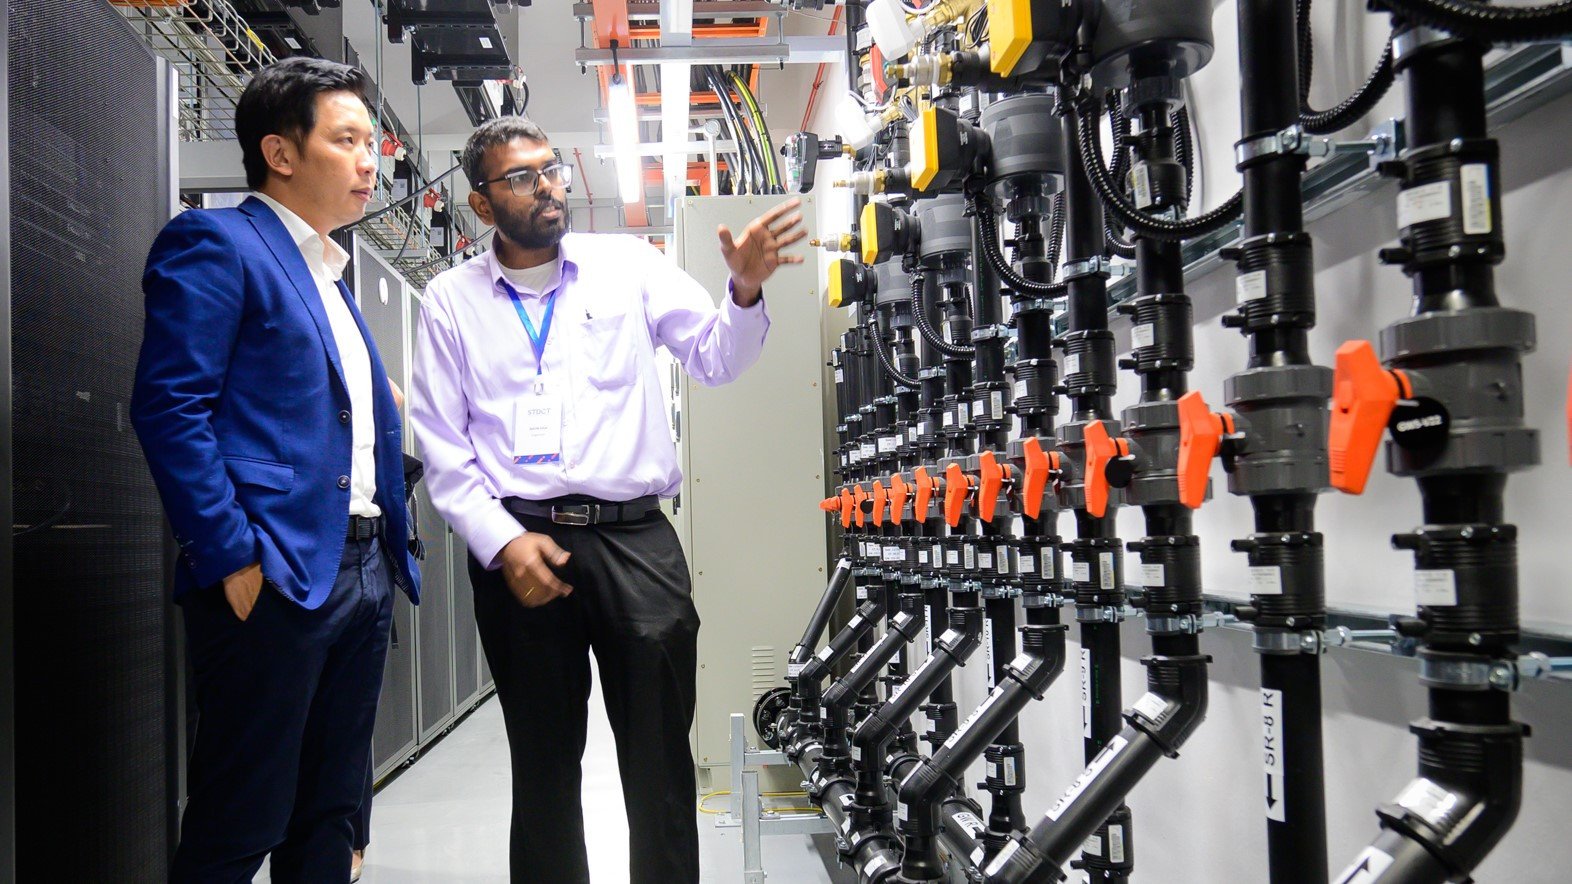 Minister of State for Trade and Industry Mr Alvin Tan (left) toured the new Sustainable Tropical Data Centre Testbed (STDCT) facility at the National University of Singapore (NUS)